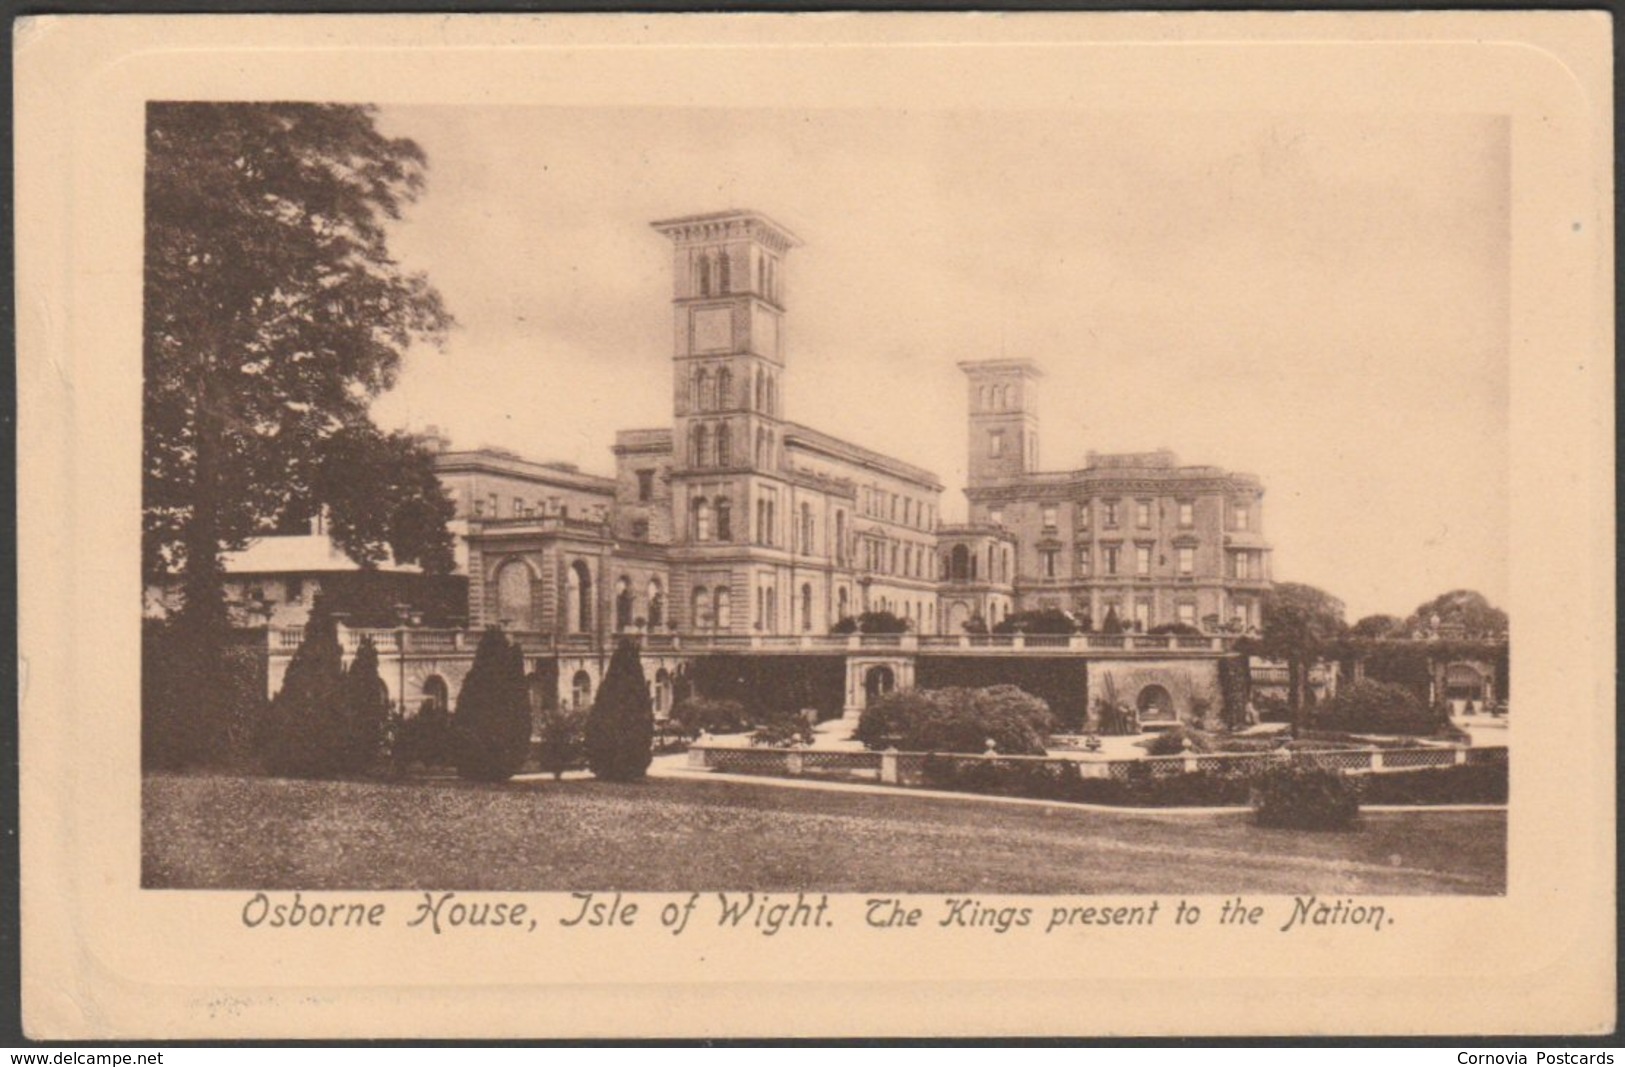 Osborne House, Isle Of Wight, 1912 - Frith's Postcard - Cowes